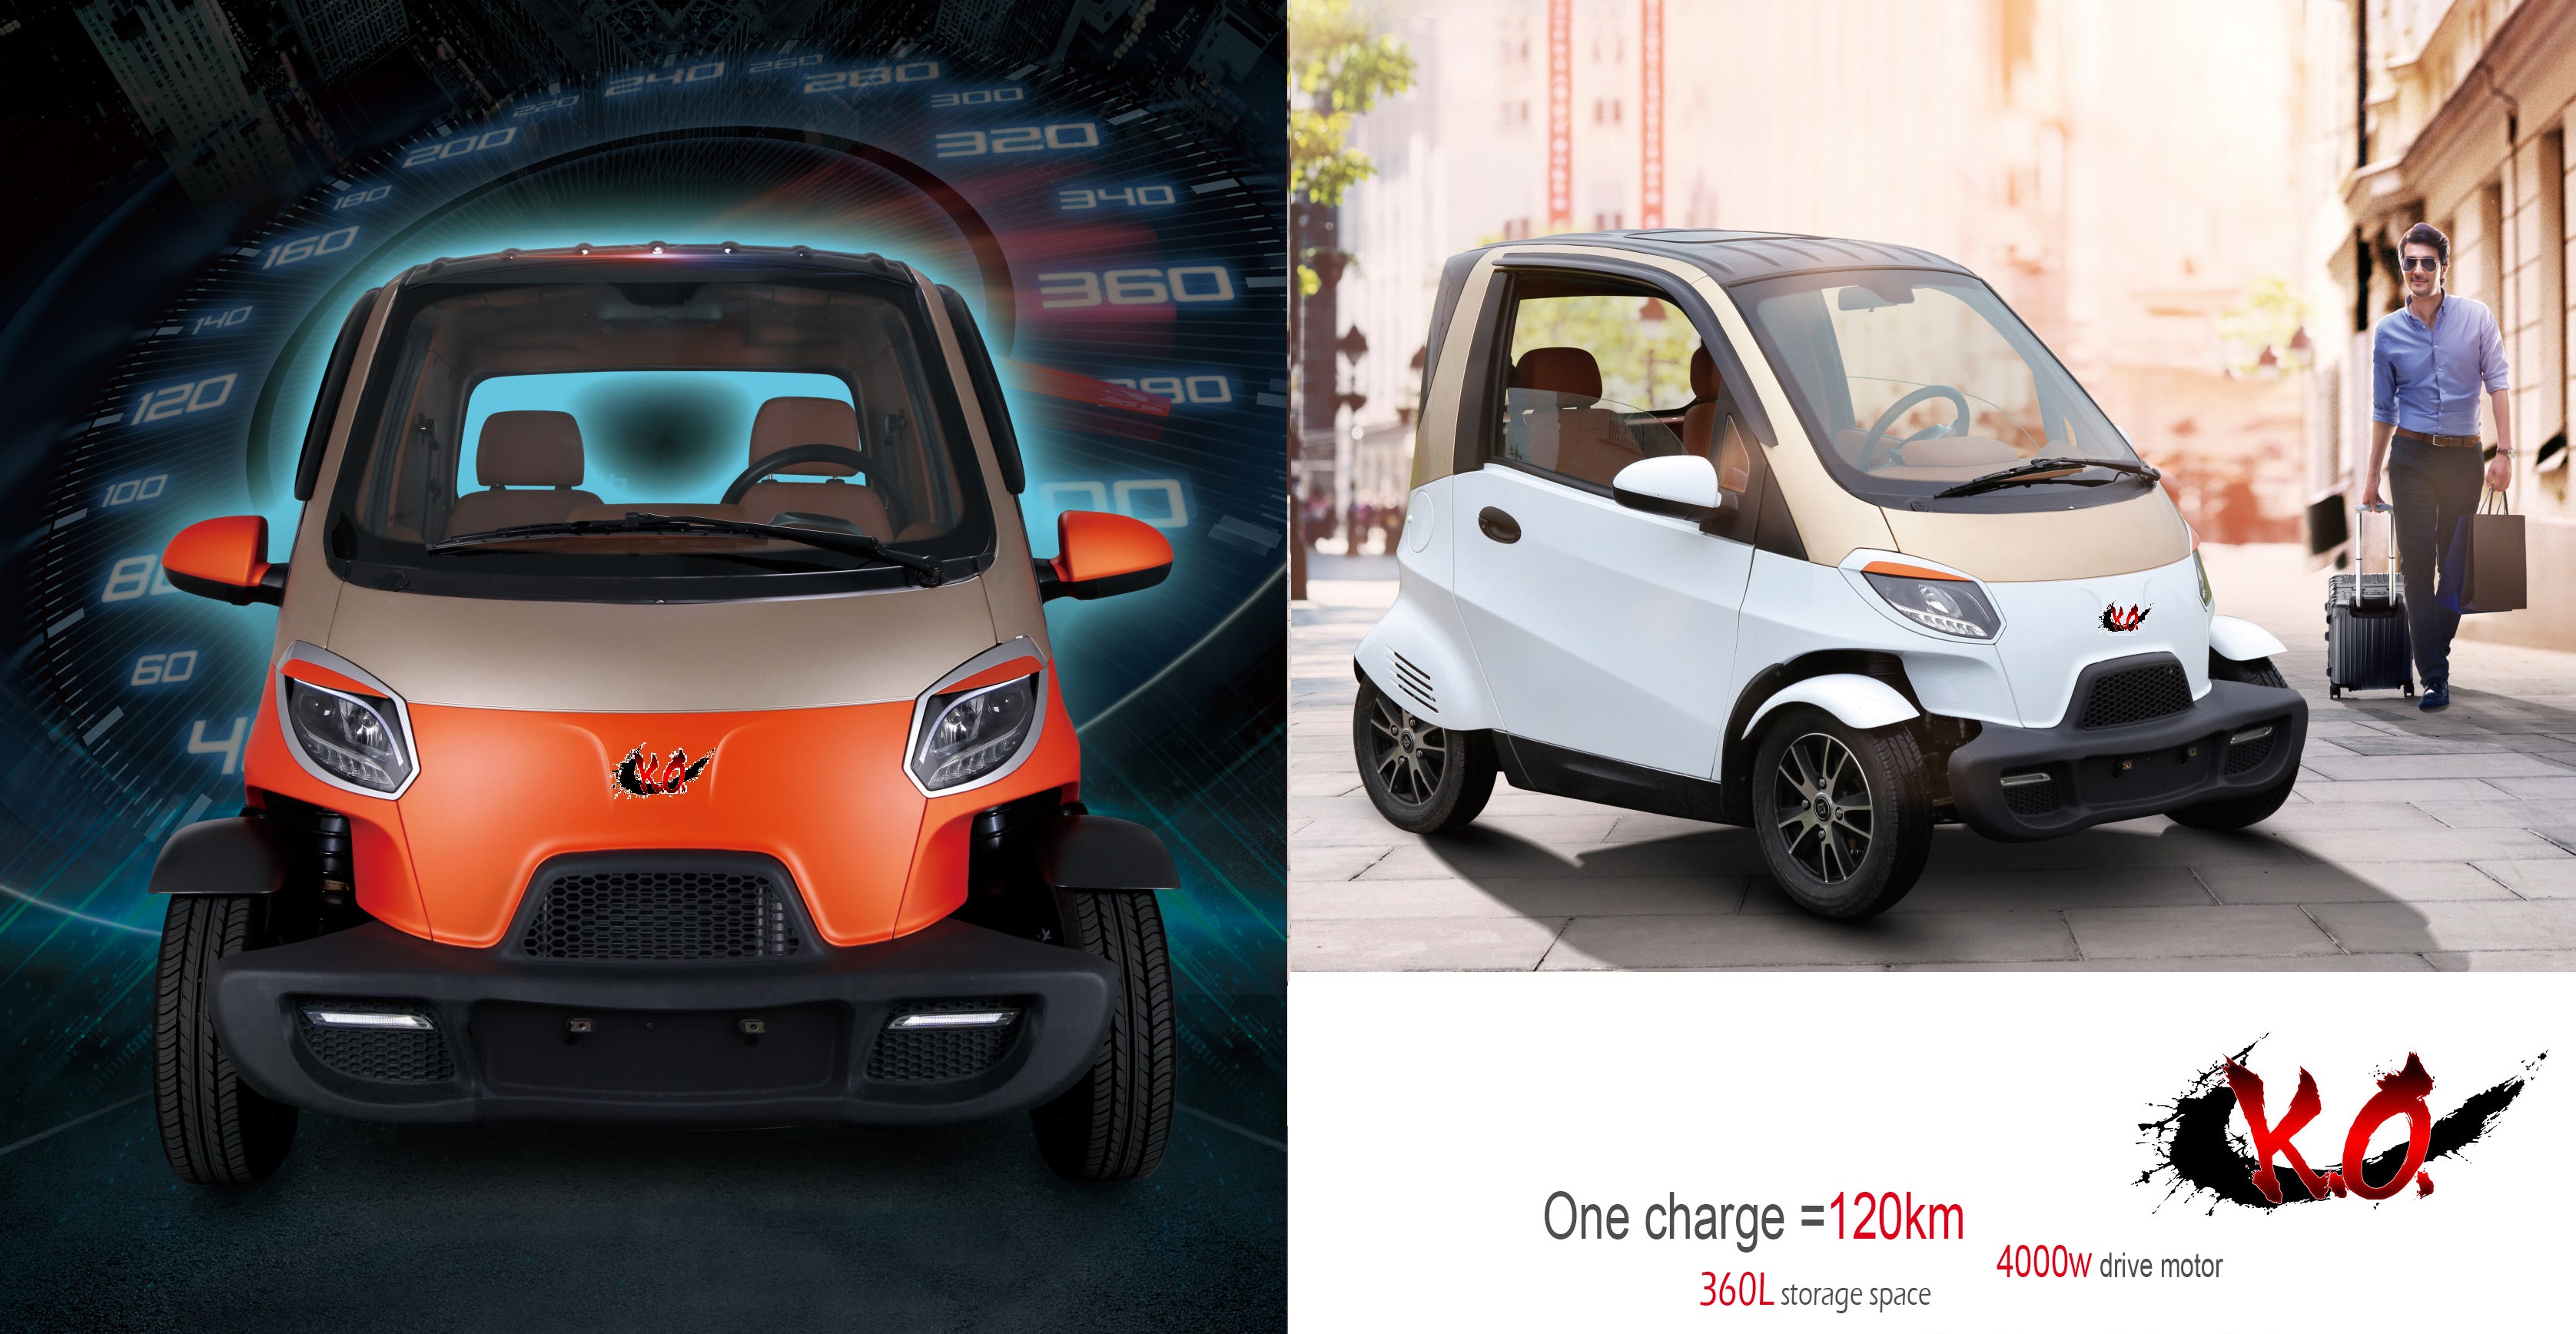 The four wheel mini electric car is called the KO